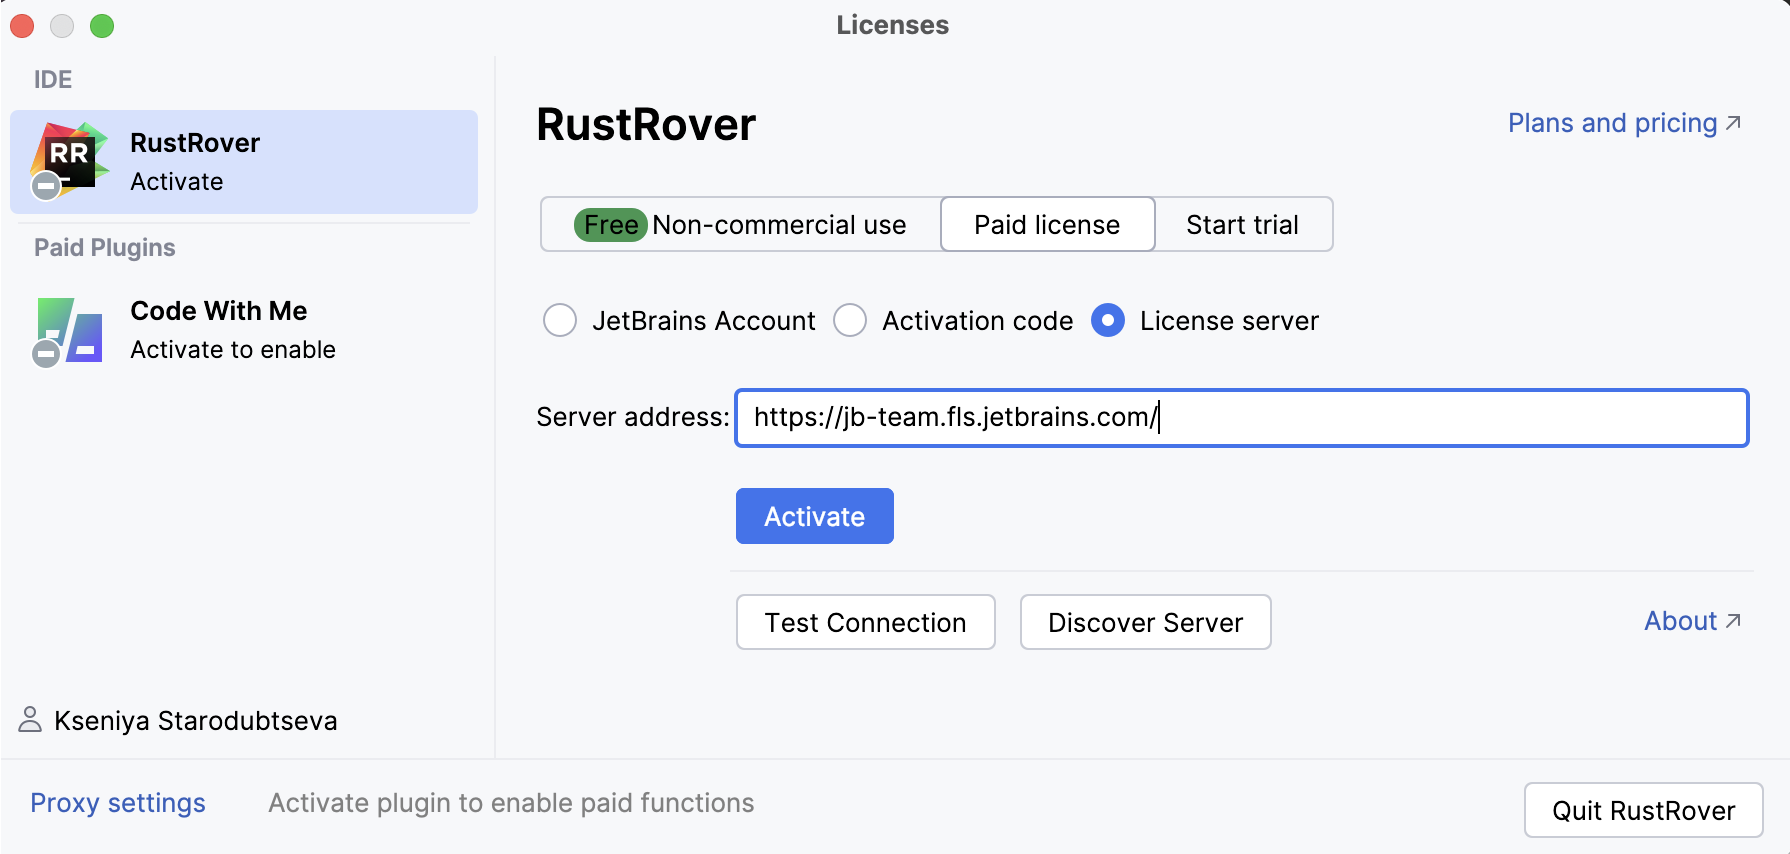 Activate RustRover license with a license server